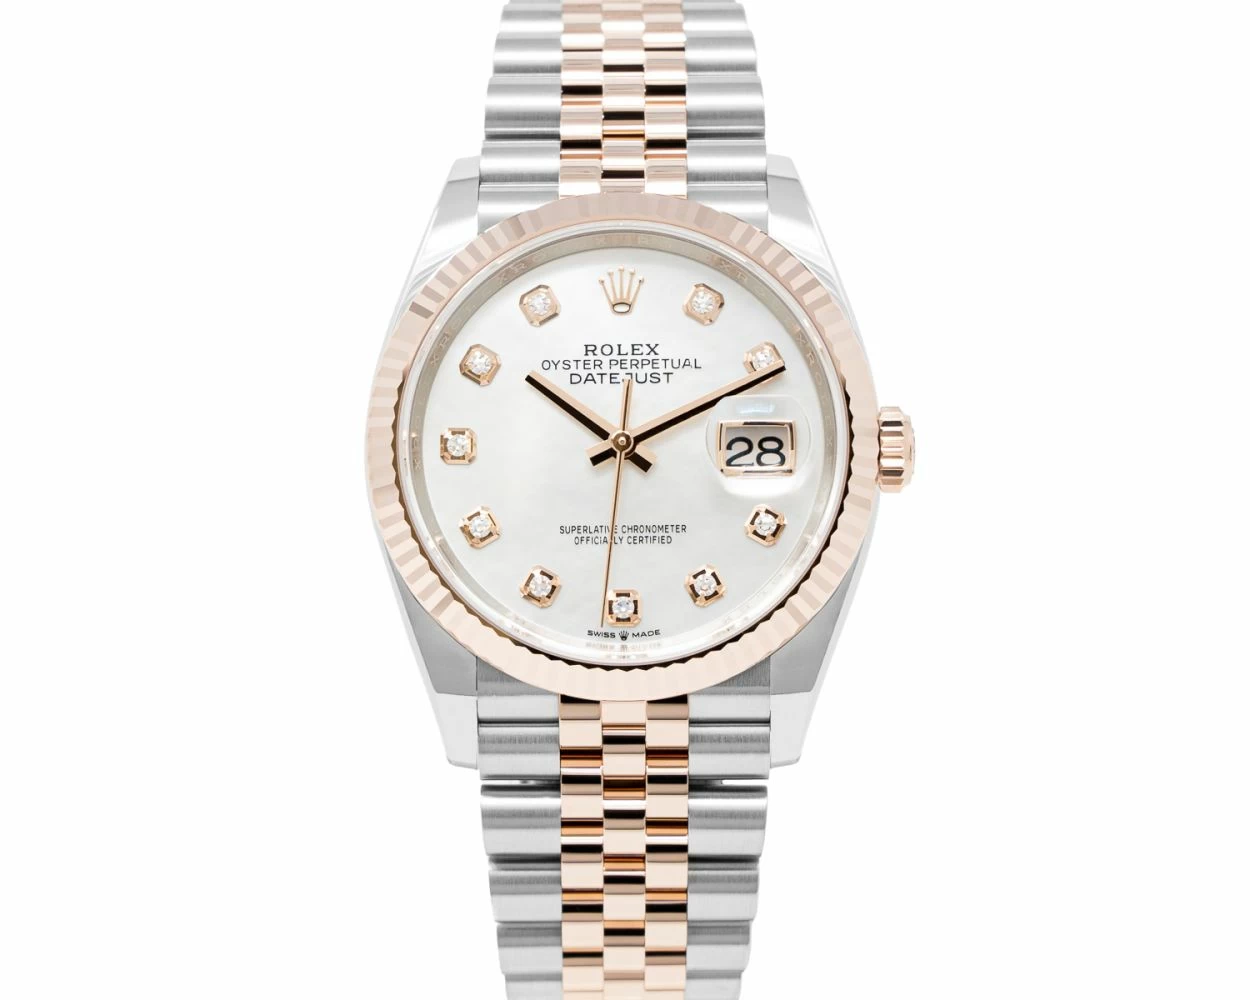 Rolex Datejust 36 Ultimate Buying Guide